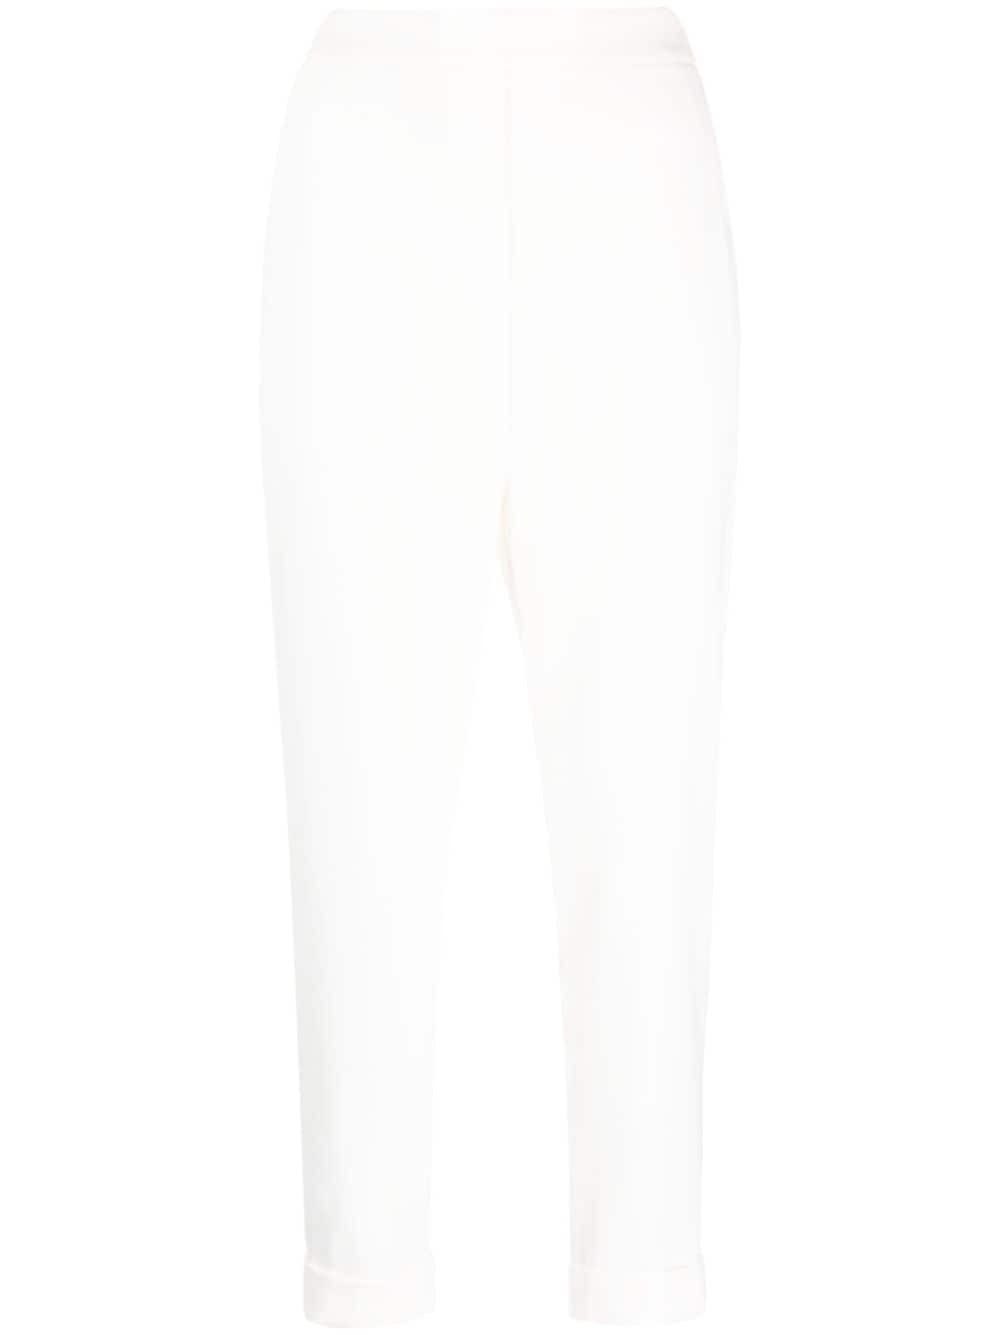 P.A.R.O.S.H ELASTICATED CROPPED TROUSERS